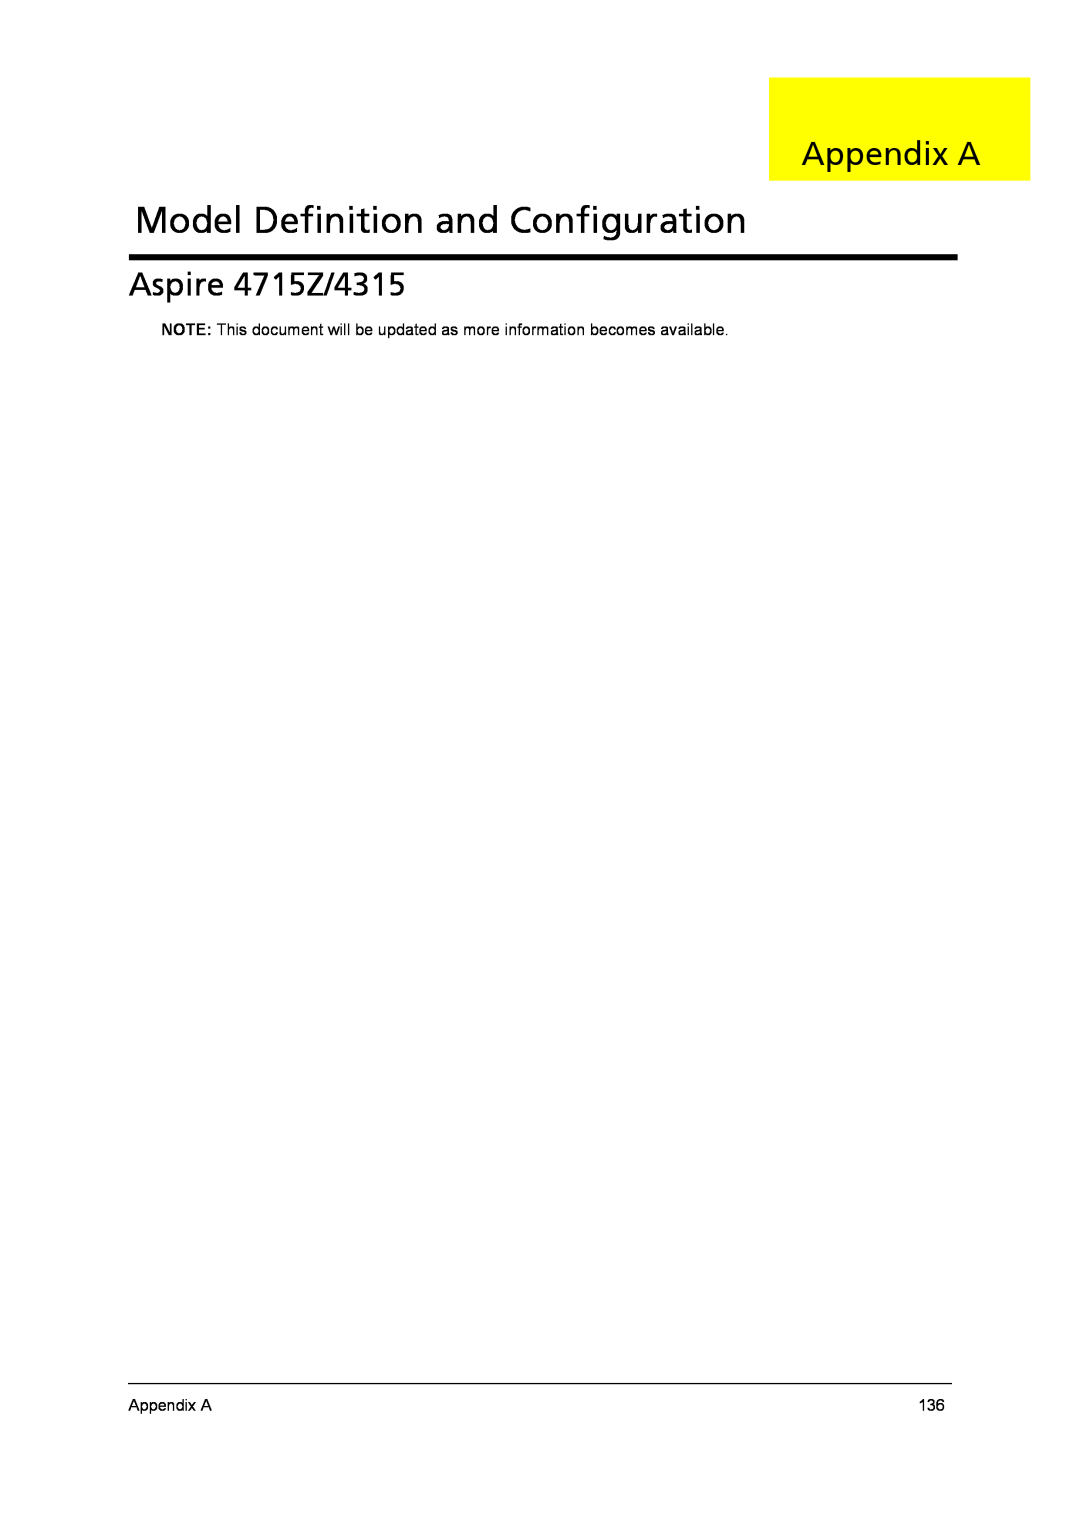 Acer manual Model Definition and Configuration, Appendix A, Aspire 4715Z/4315 